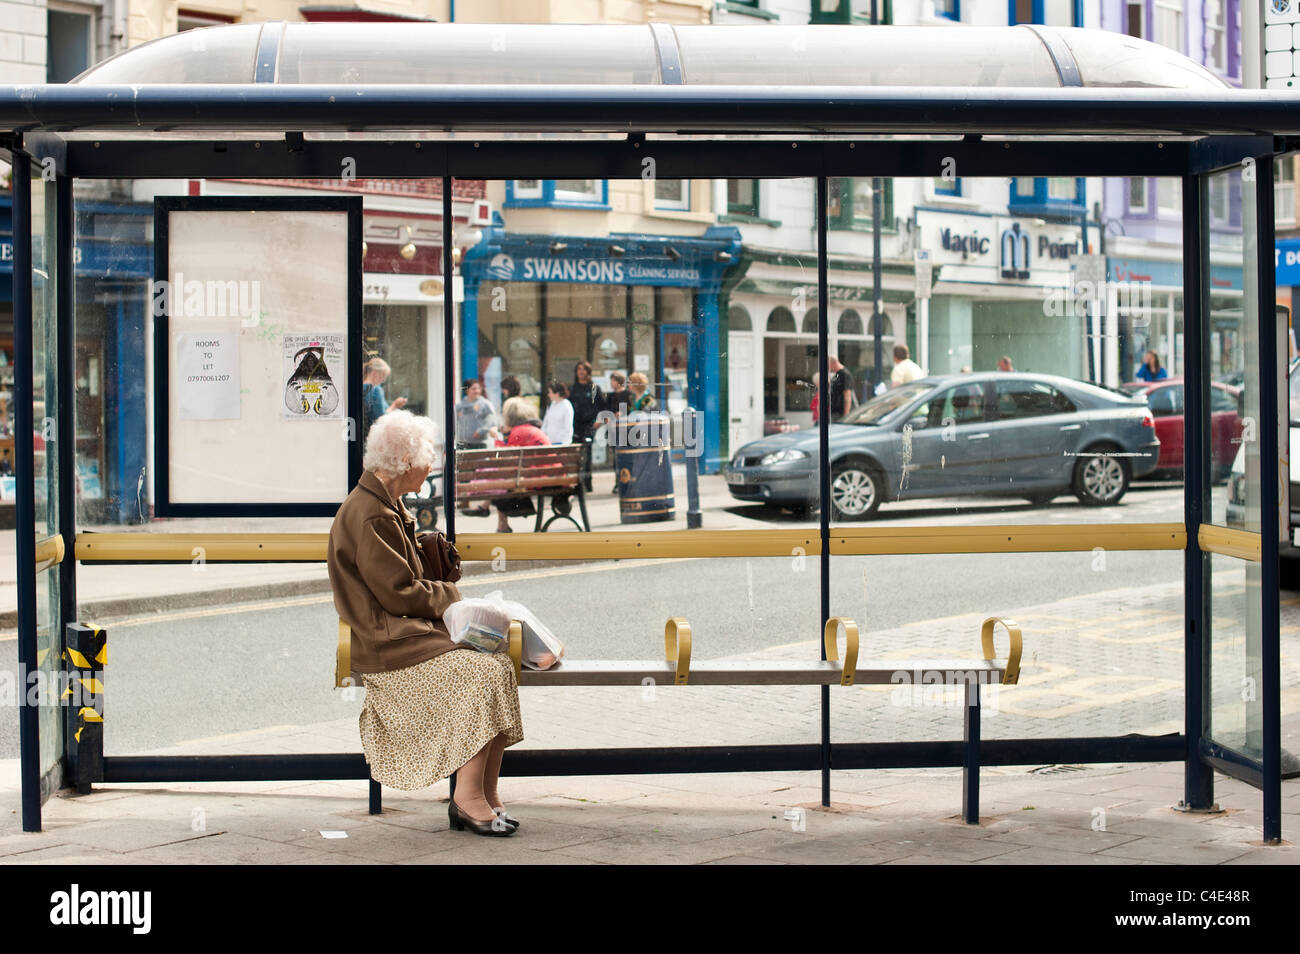 An Elderly Senior Woman Sitting Alone In A Bus Shelter Waiting For